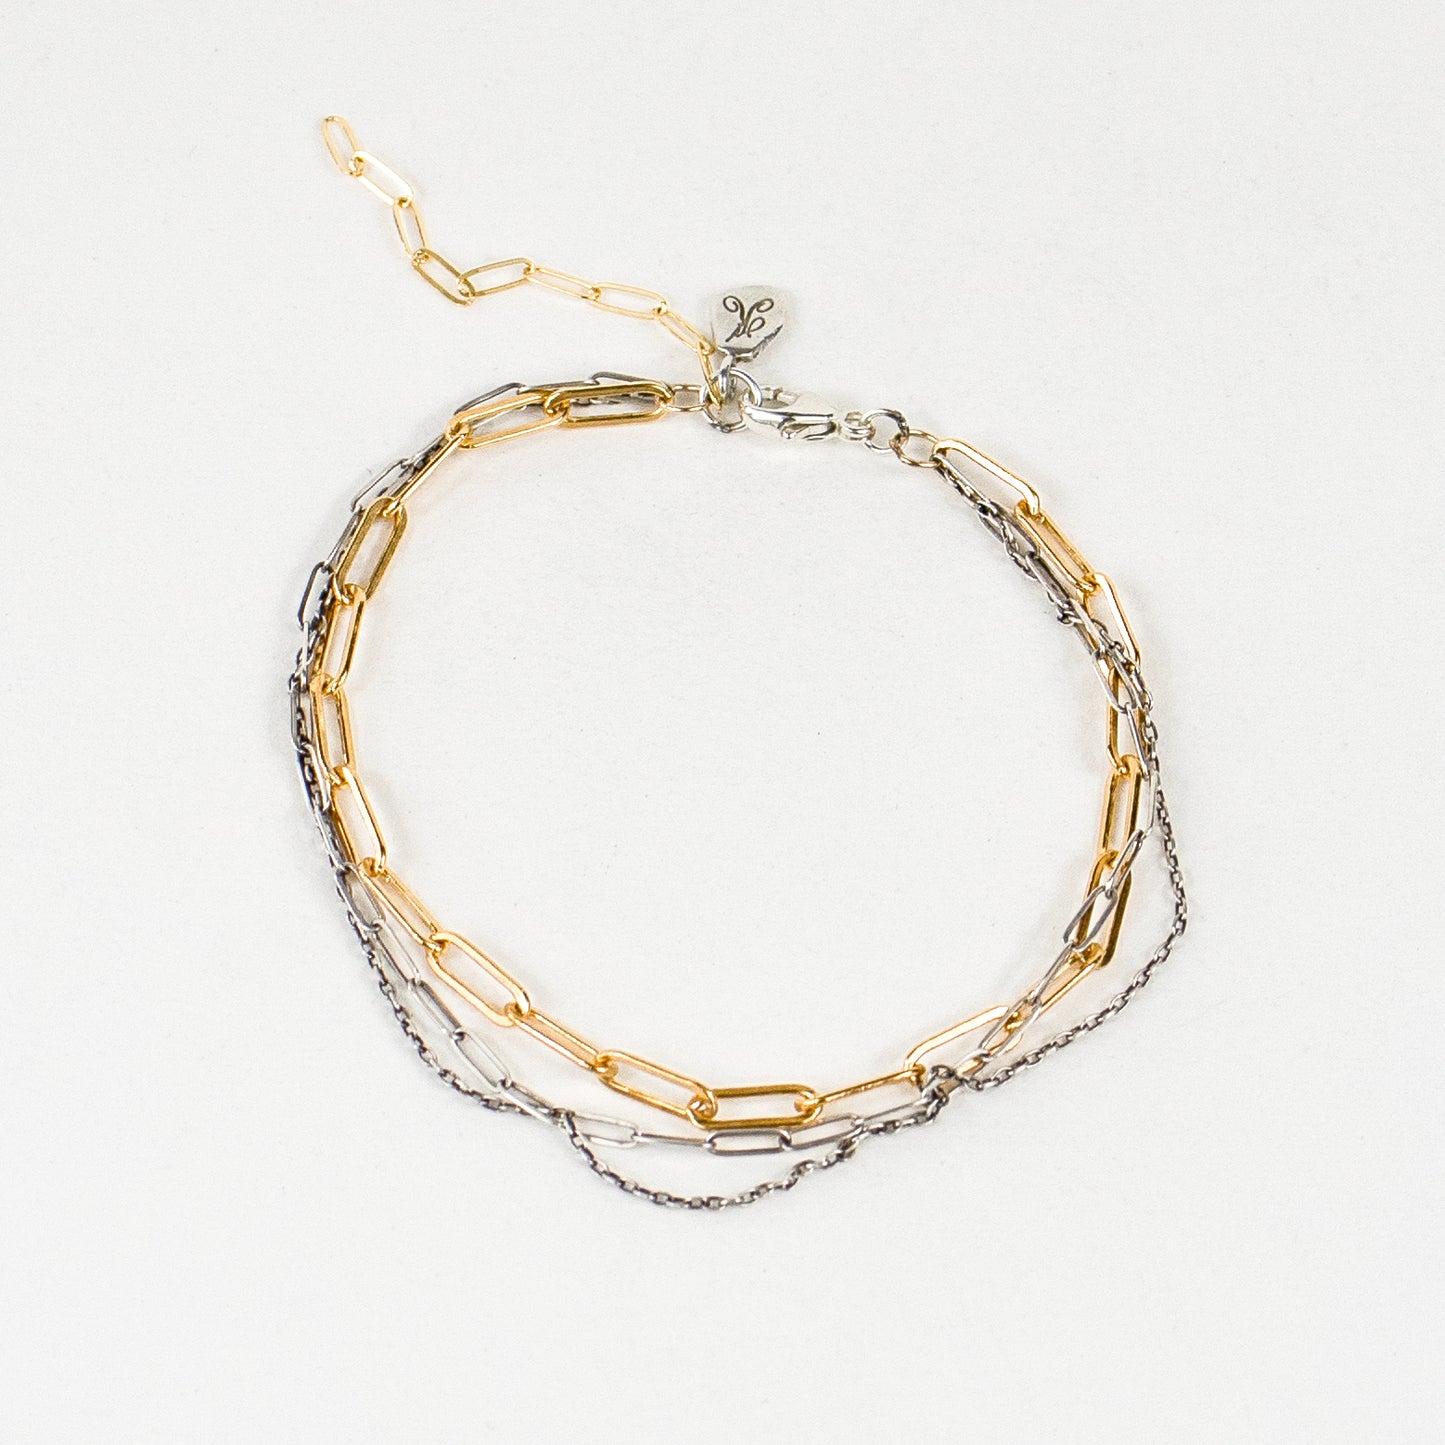 TANGLED GOLD & SILVER MIXED-CHAIN BRACELET